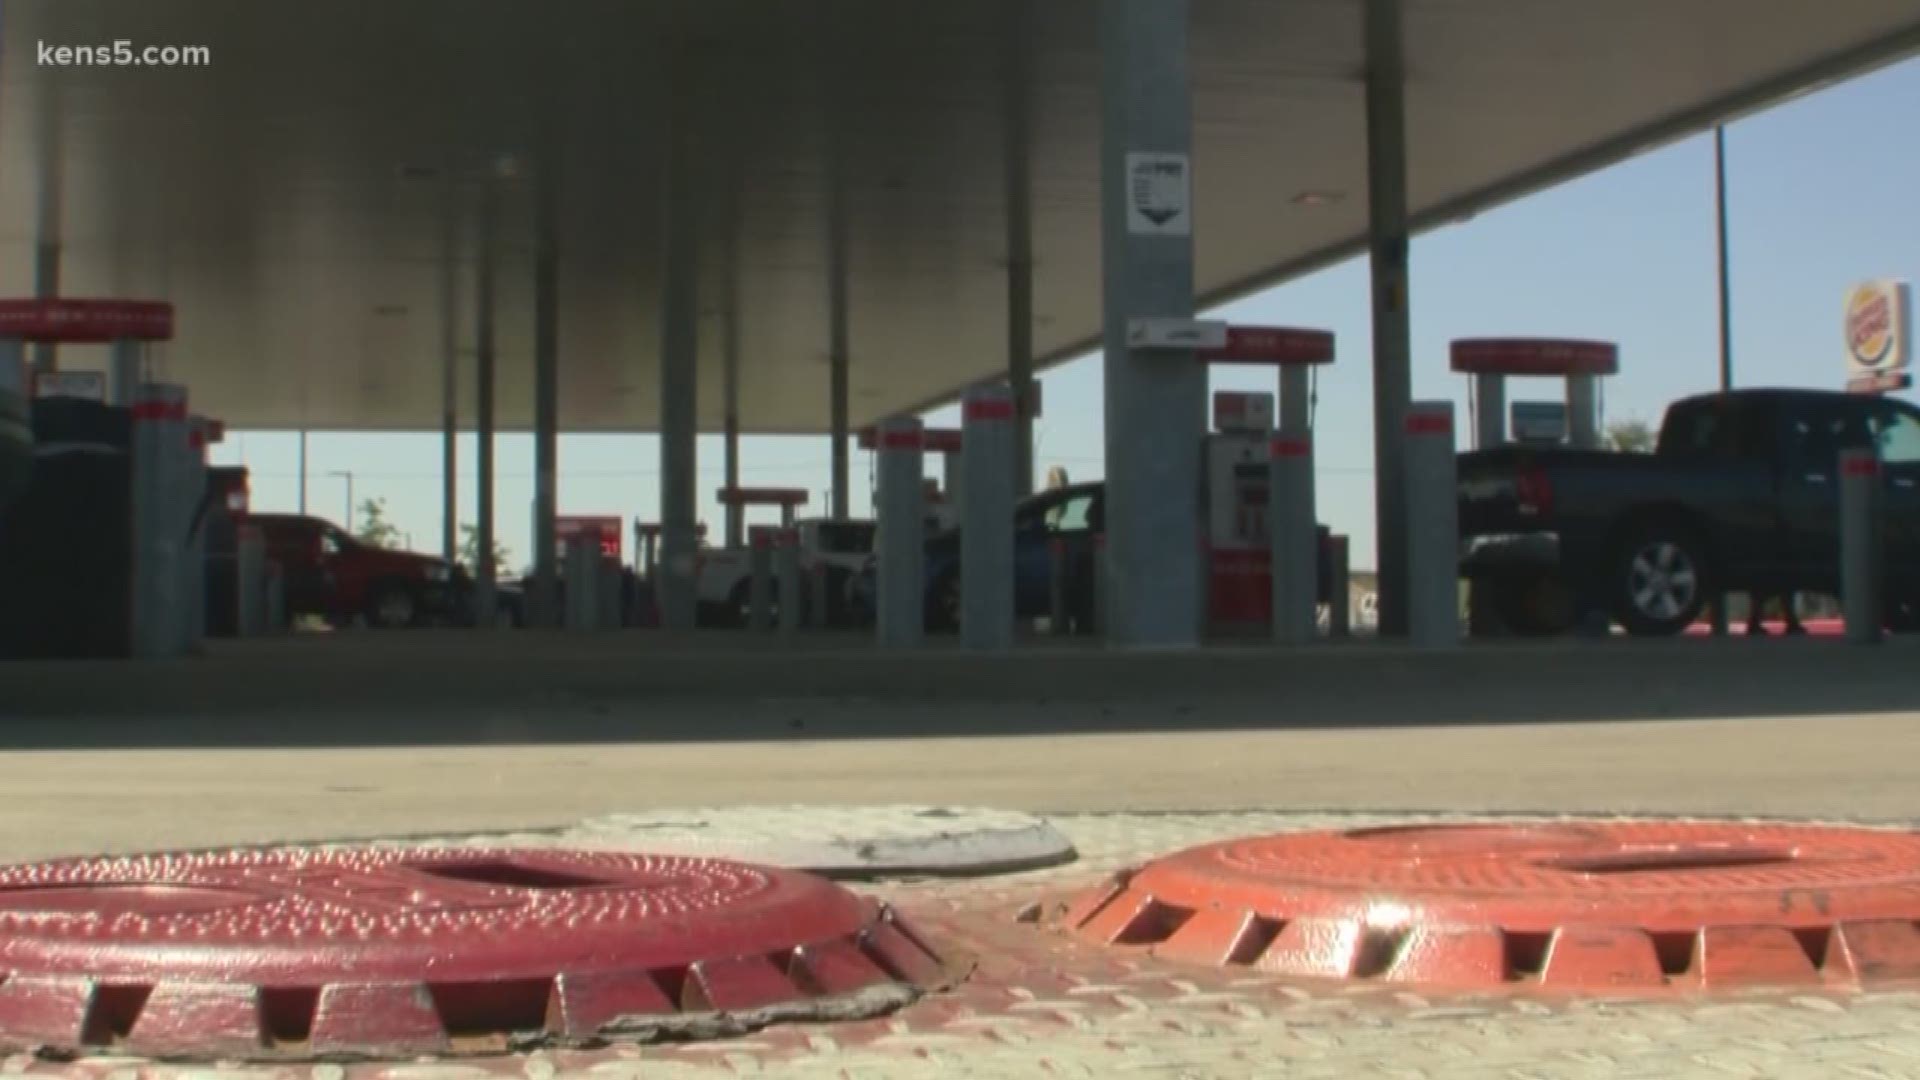 Wrong gas in the pump! That's what drivers at one H-E-B gas station in New Braunfels recently encountered.